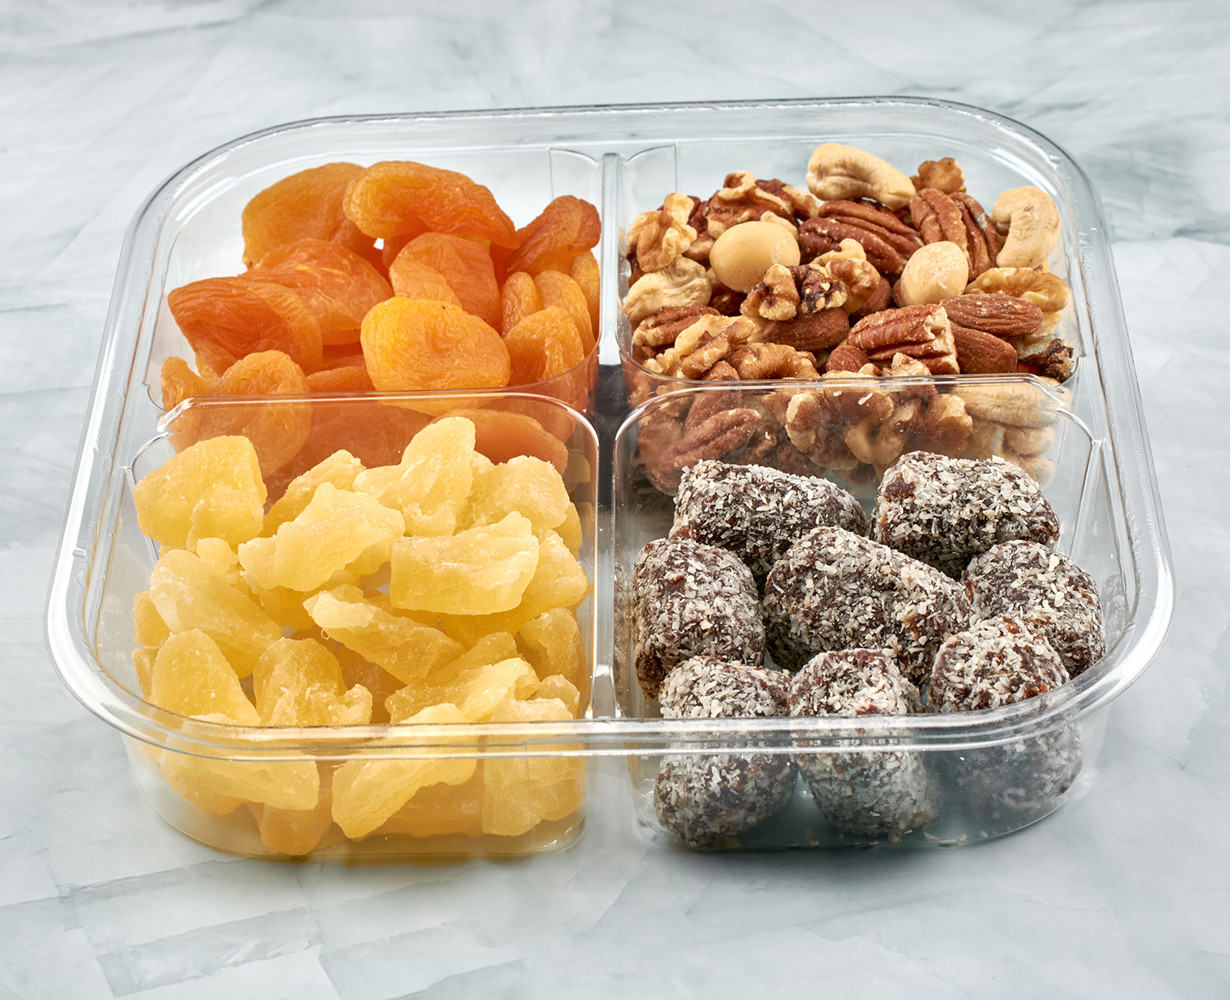 Dried Fruits and Nuts Tray verion 2